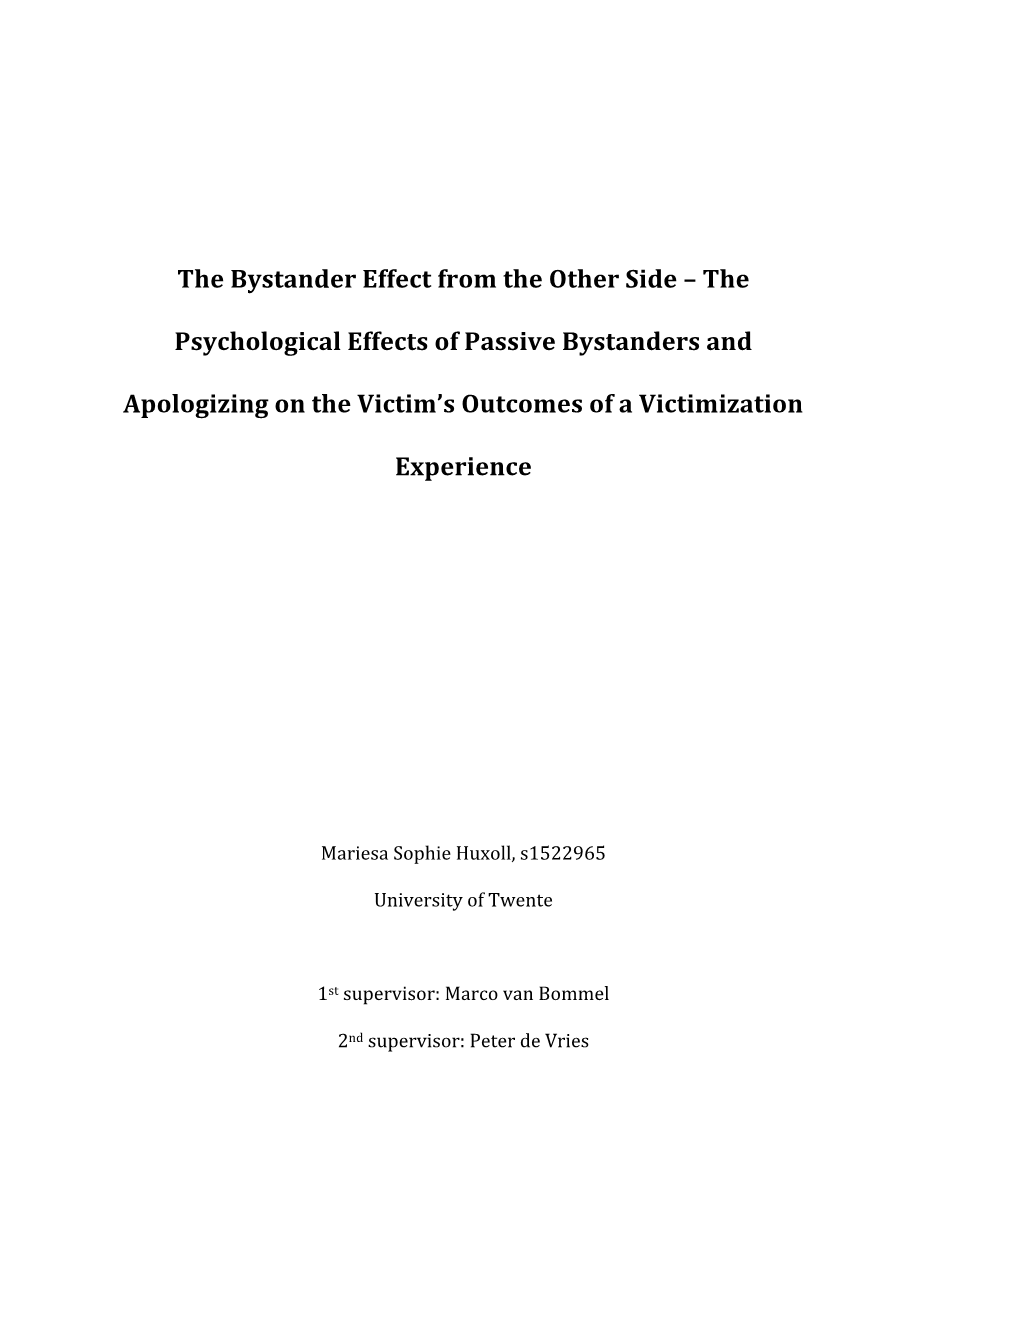 The Bystander Effect from the Other Side – The